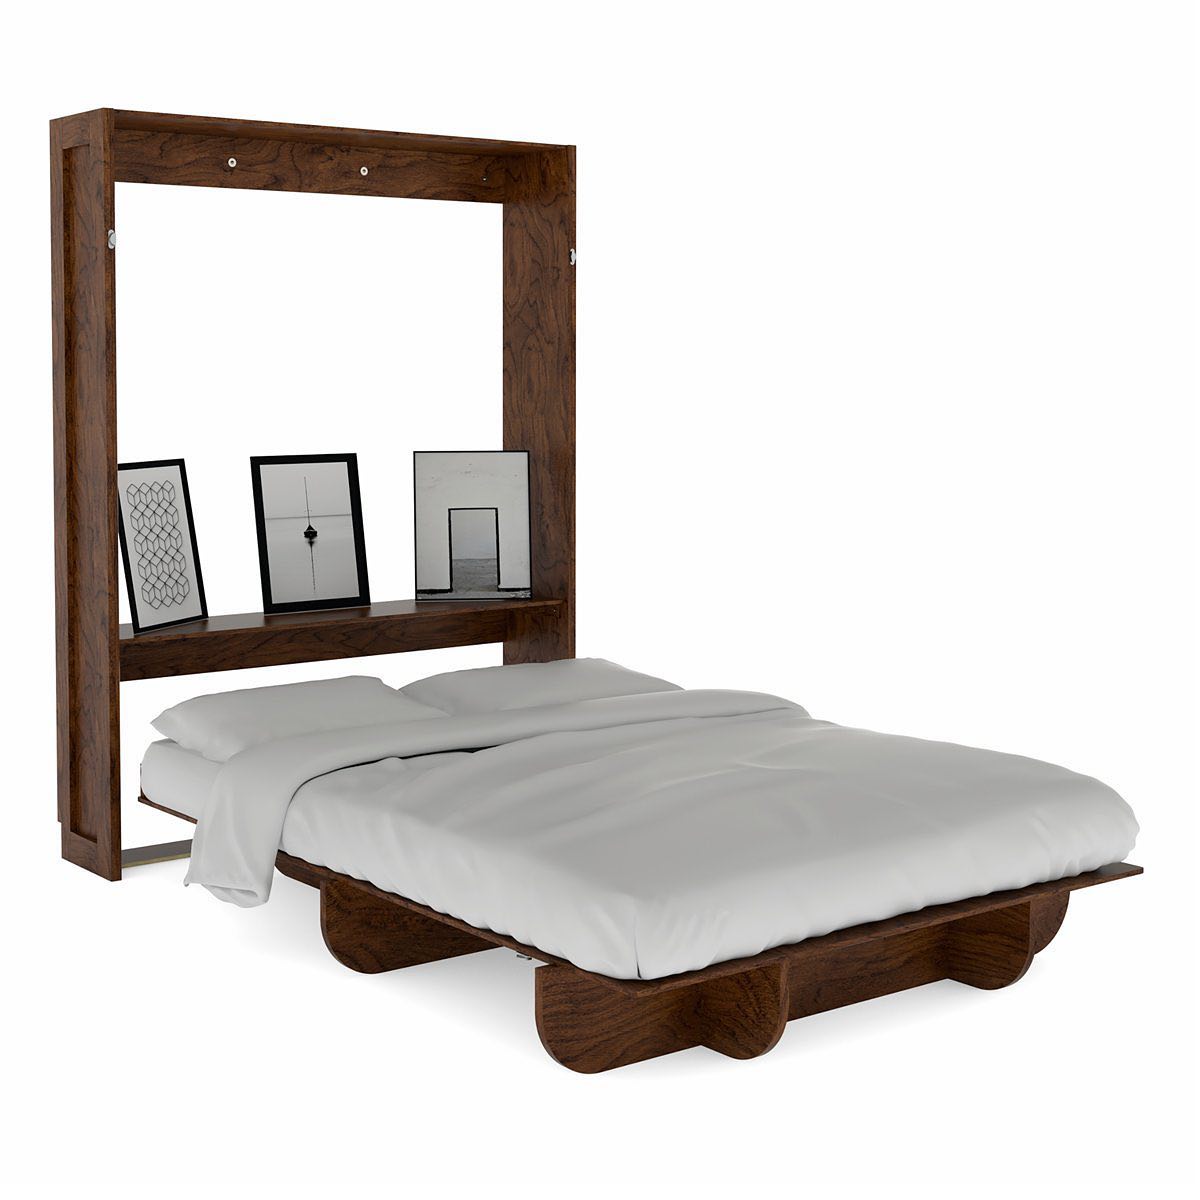 Chicago Murphy Bed Installation: Save Space, Gain Style With The Lori Bed